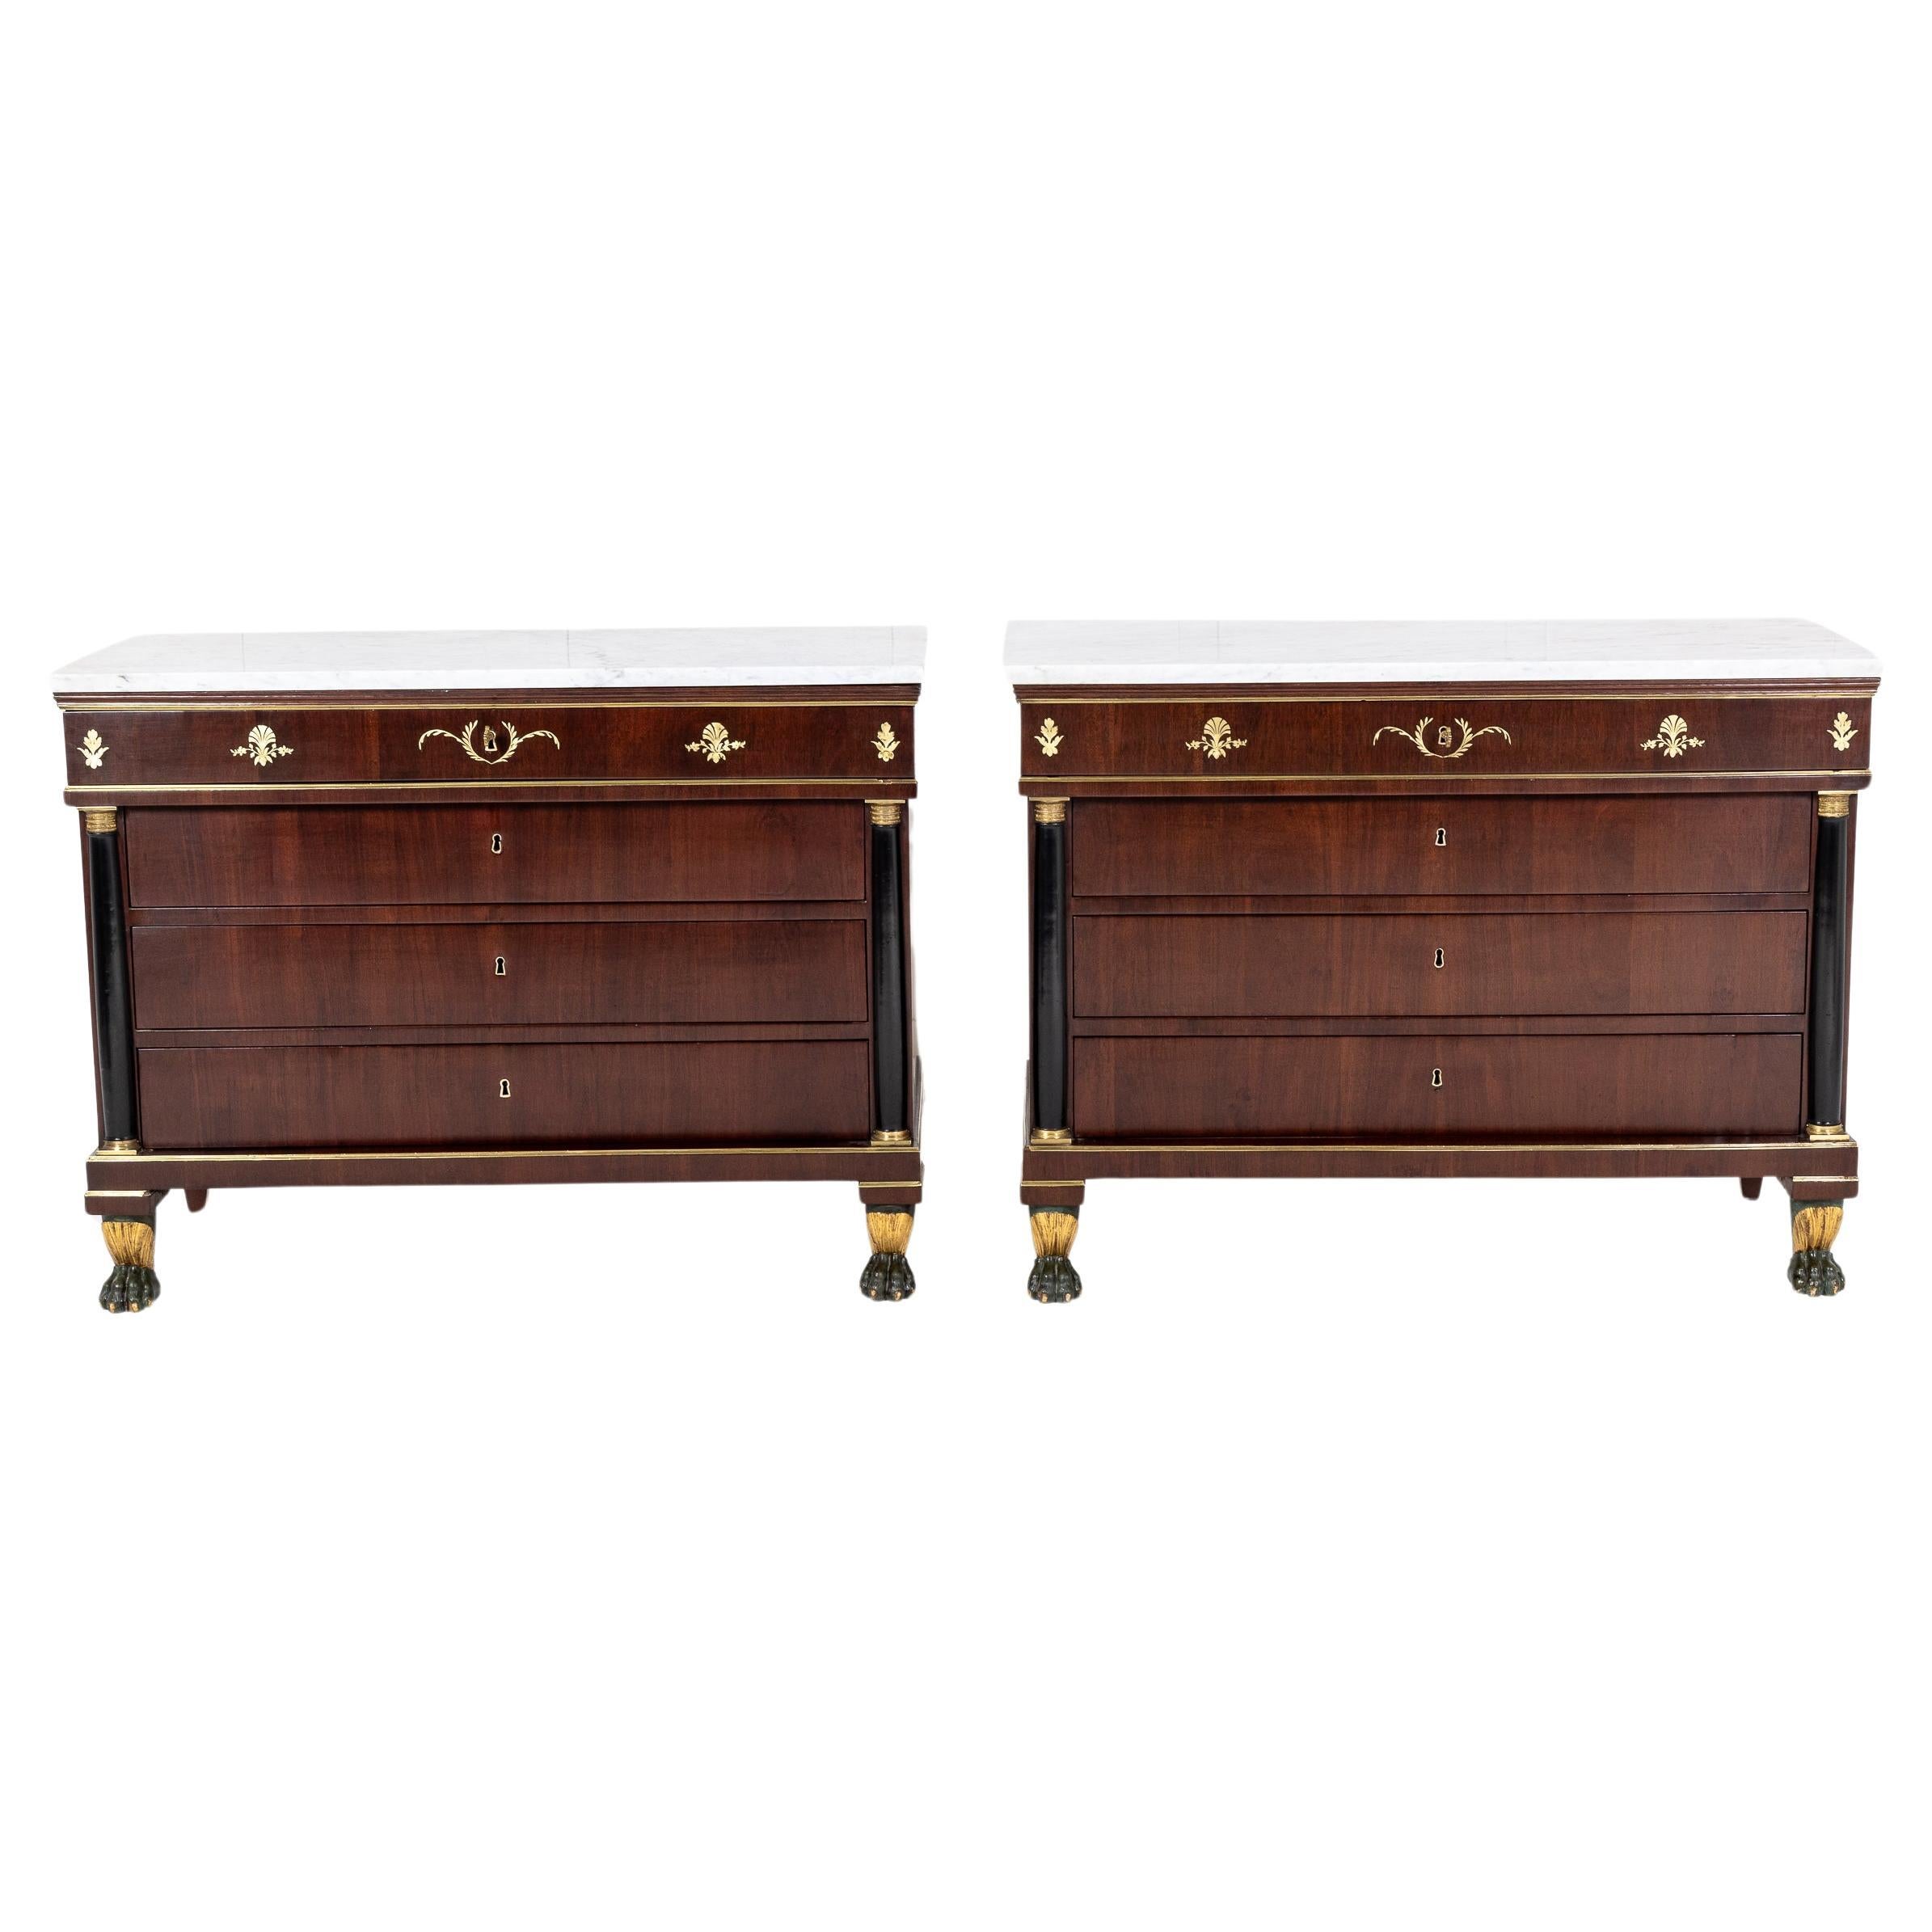 Pair of Italian Rosewood Inlaid 'Empire' Commodes C1820 For Sale